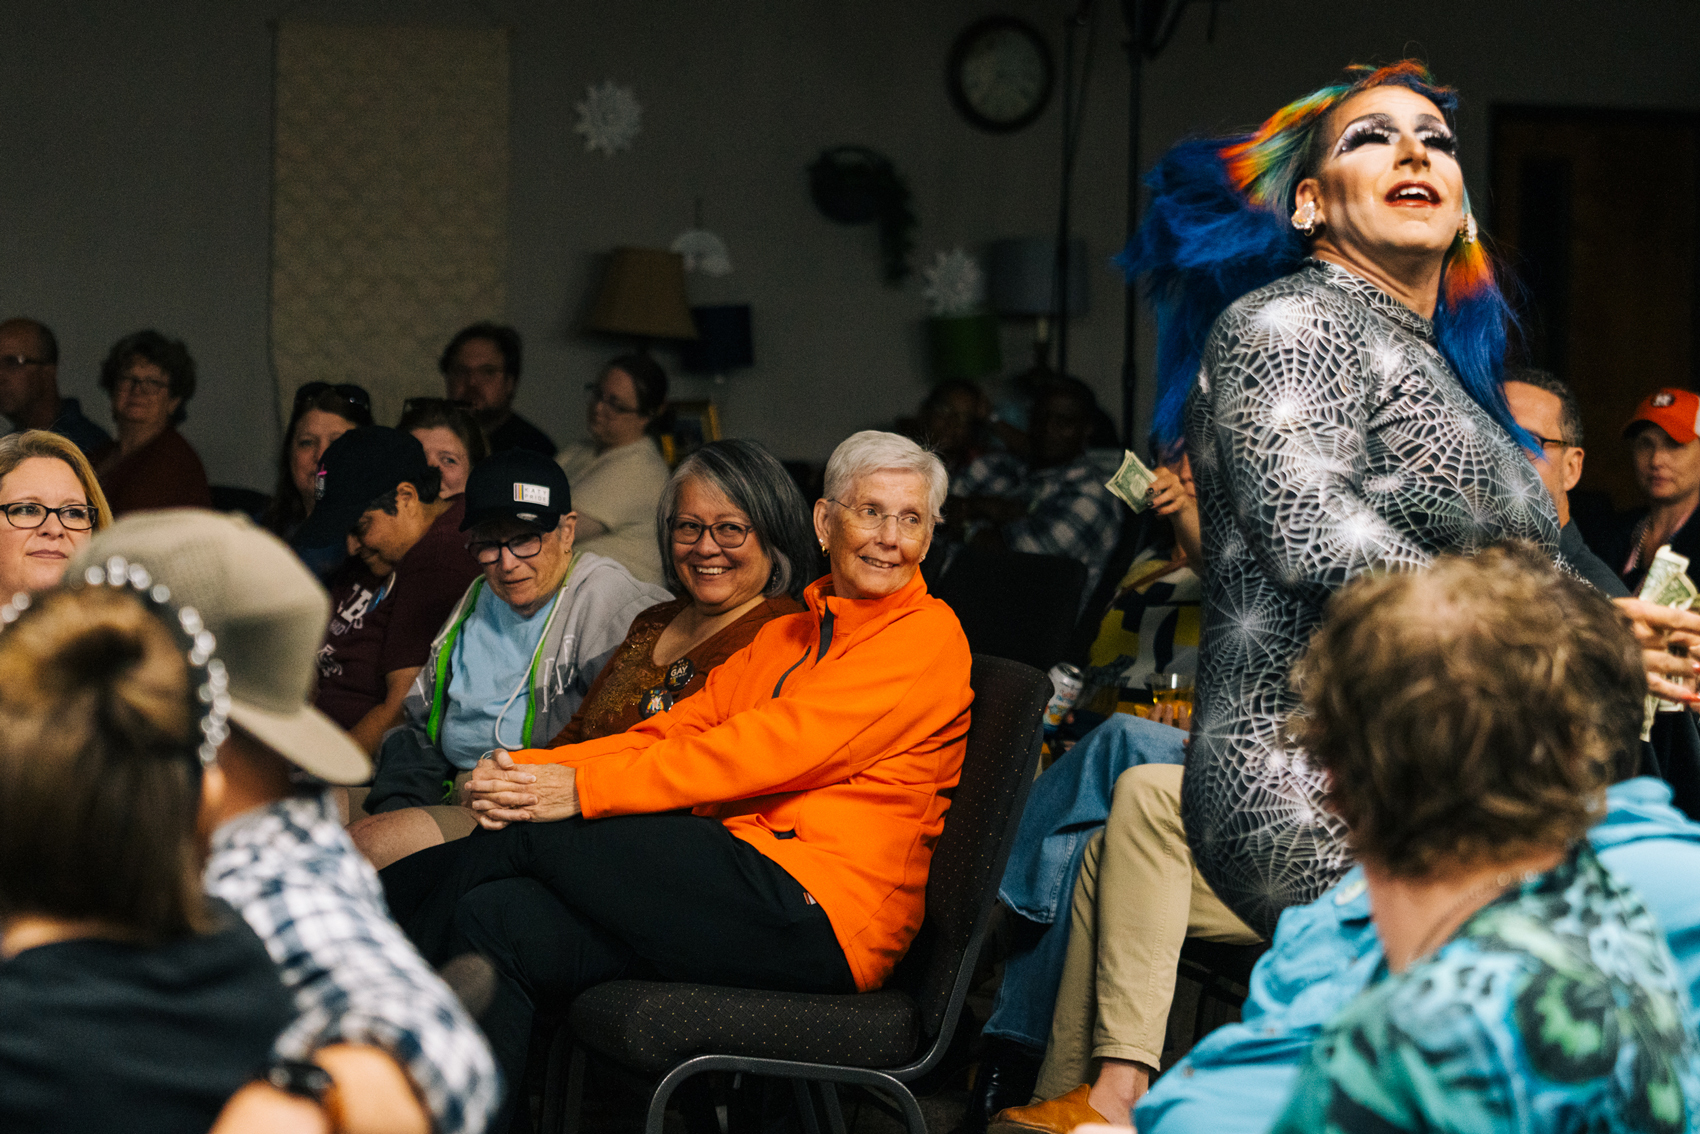 Drag queen Kiki Dion Van Wales performs as attendees cheer at the after party, “Wicked with the Queens,” at First Christian Church